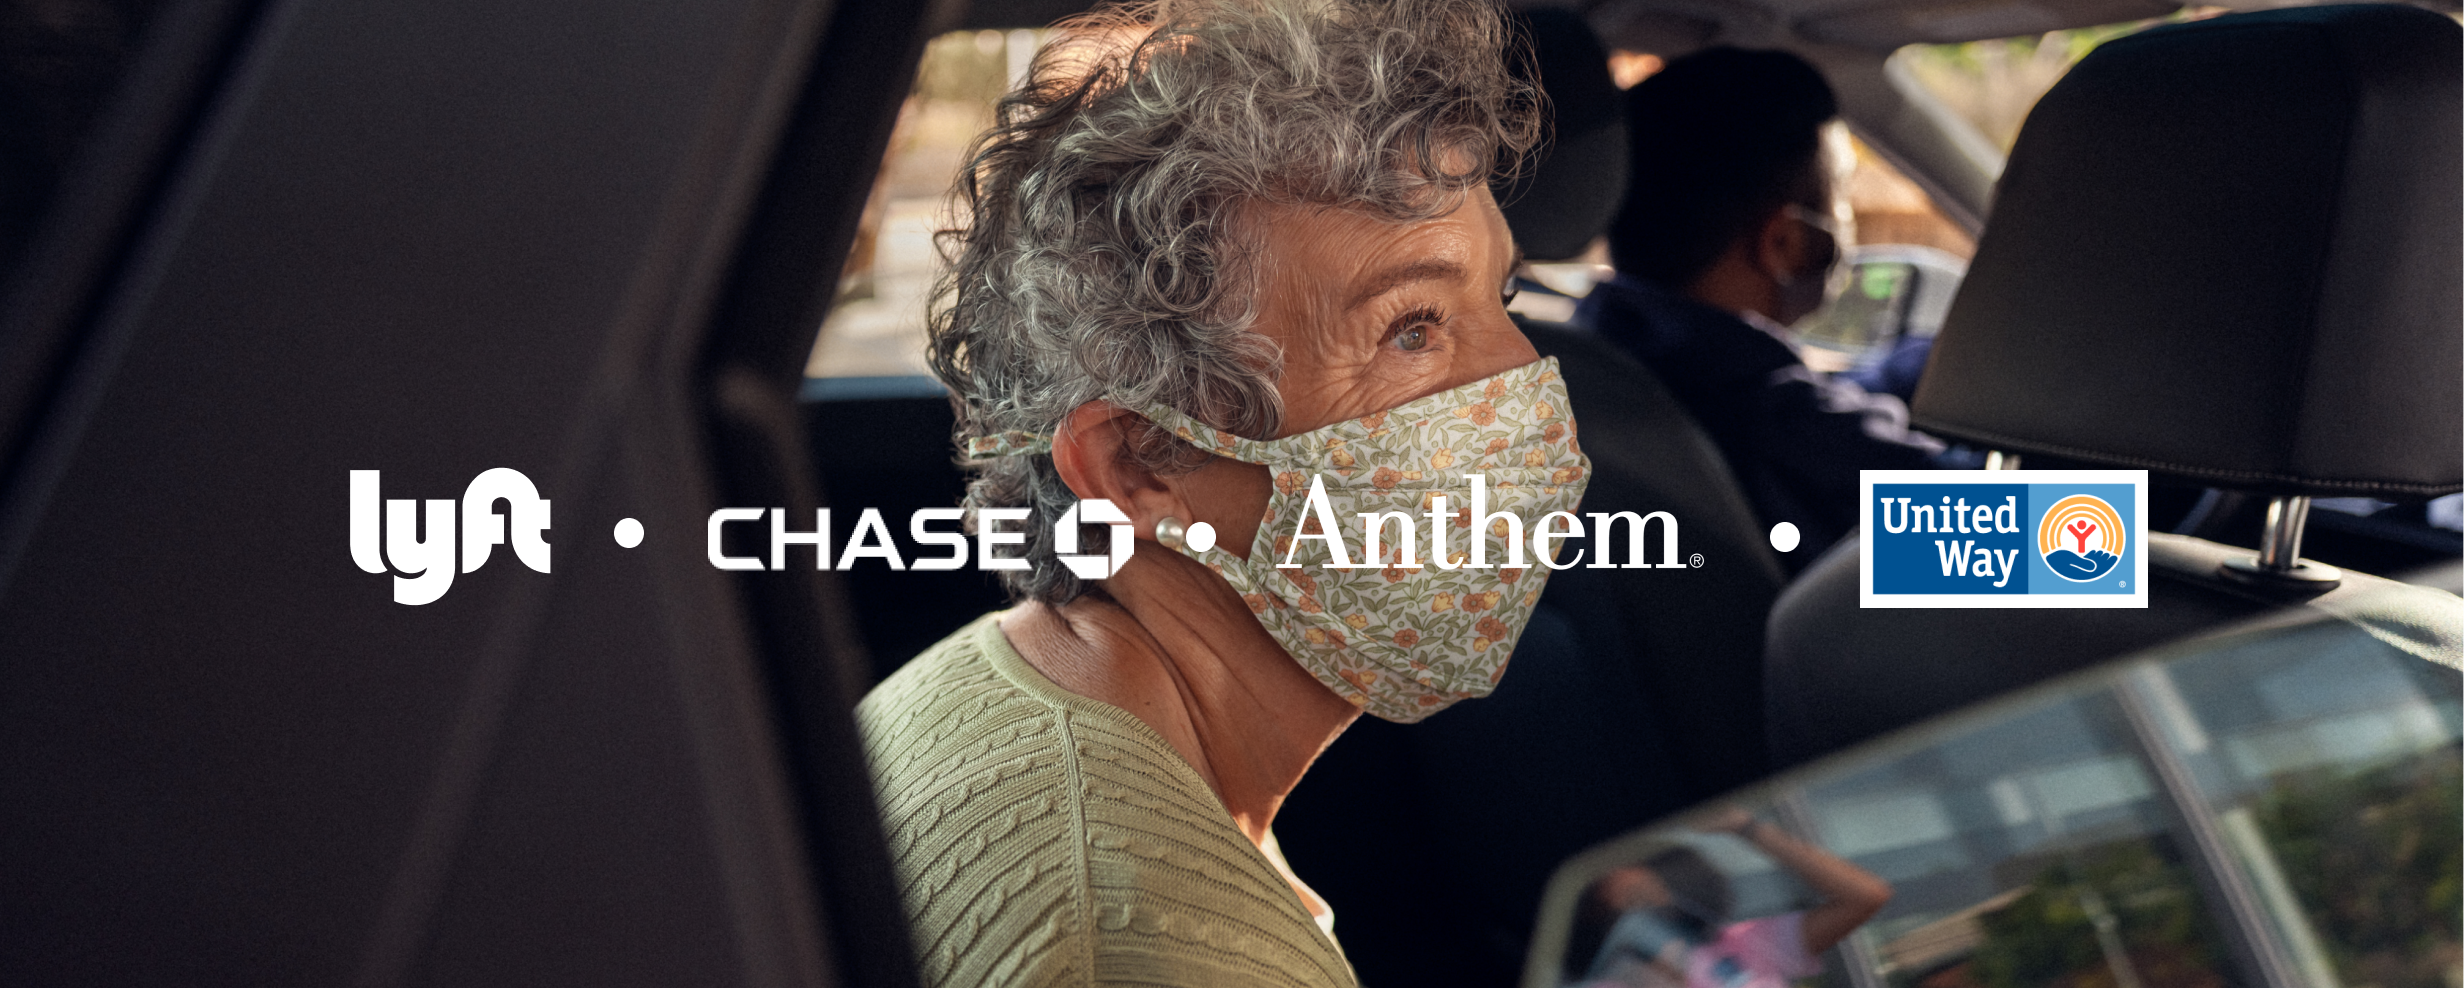 We're partnering with Anthem, JP Morgan Chase, and United Way to Launch Universal Vaccine Access Campaign